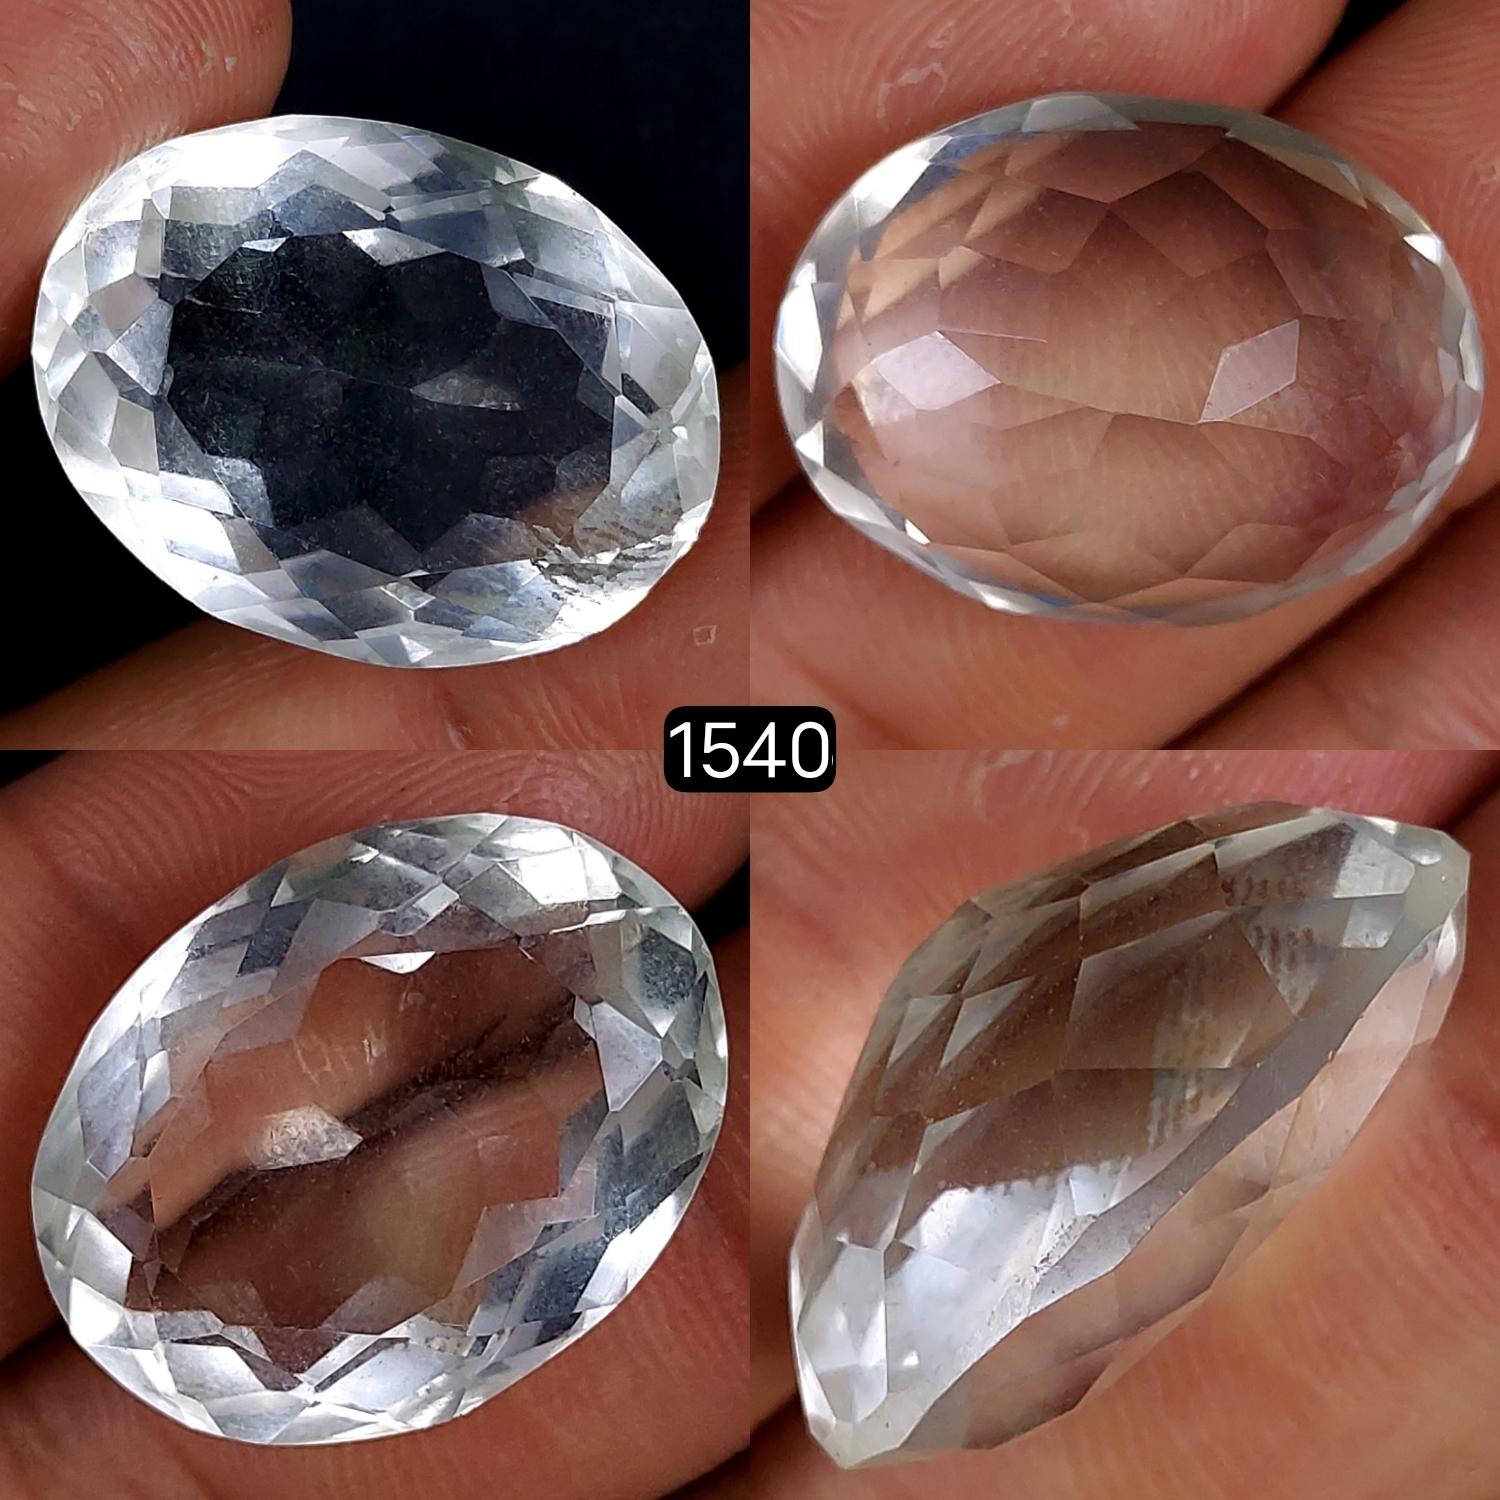 1Pc 35Cts Natural Crystal Quartz Faceted Cabochon Gemstone Oval Shape Crystal 25x17mm#1540